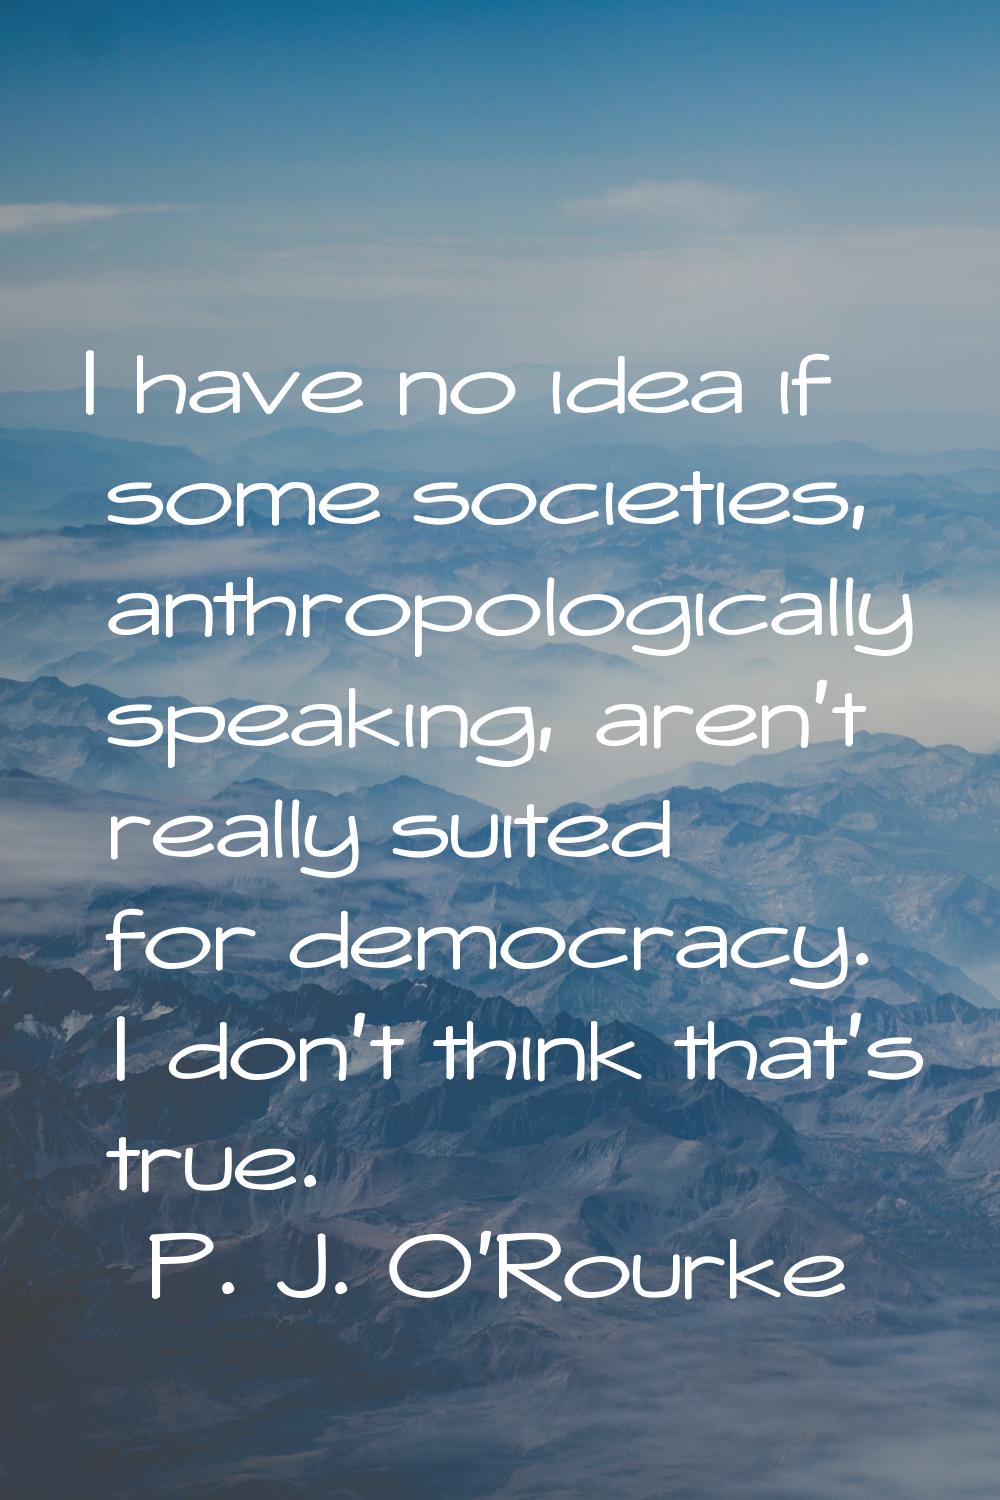 I have no idea if some societies, anthropologically speaking, aren't really suited for democracy. I